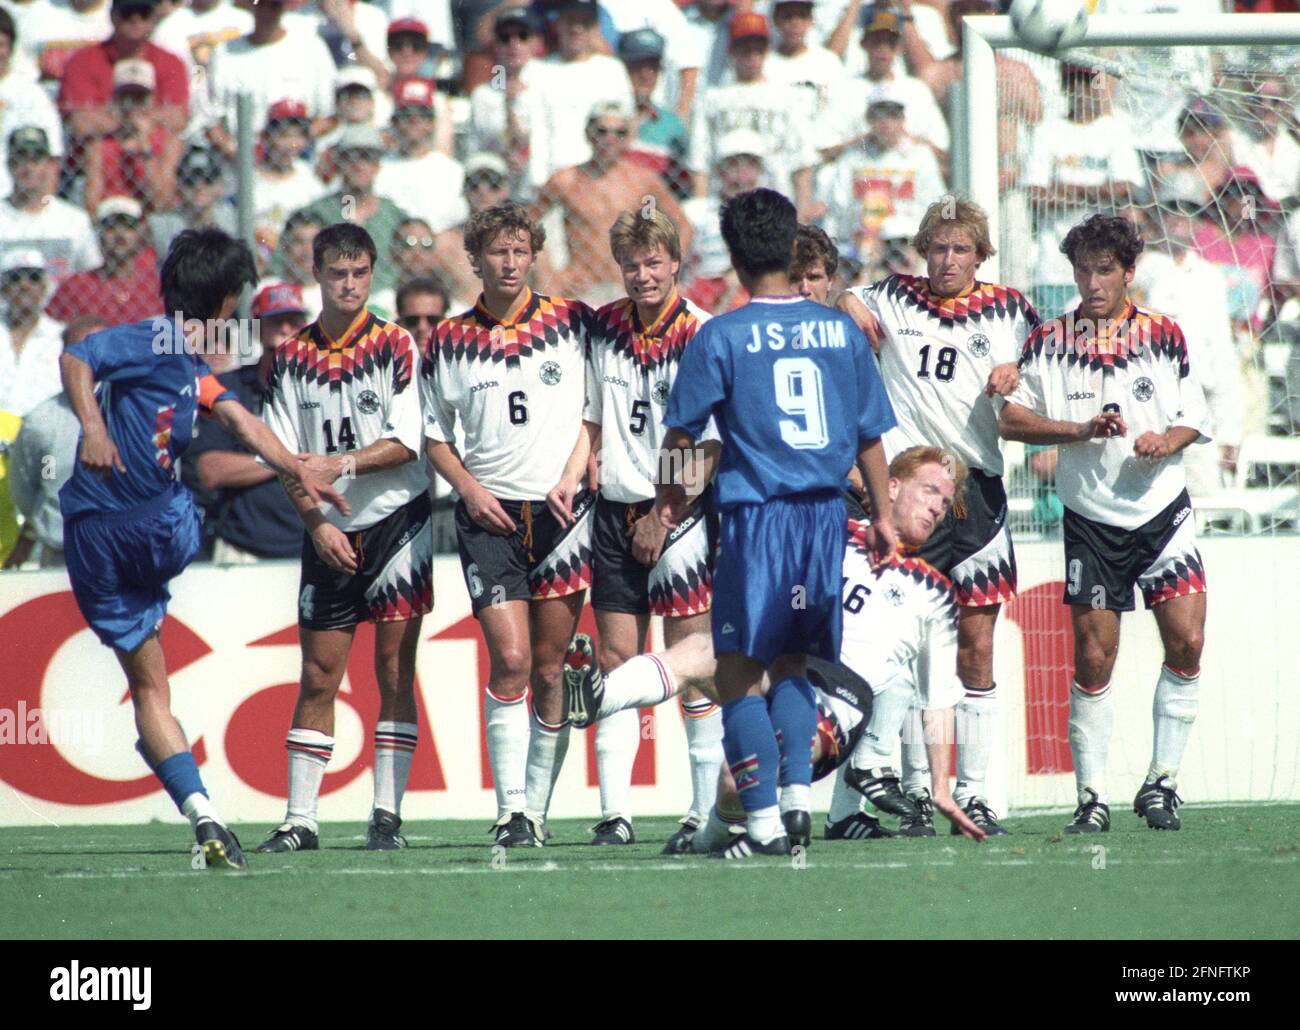 World Cup 94 Germany - South Korea 3:2/27.06.1994 in Dallas. The German defence wall during a free kick by the South Koreans. From left: Berthold, Buchwald, Helmer, Möller (obscured), Sammer (on the ground), Klinsmann and Riedle. [automated translation] Stock Photo